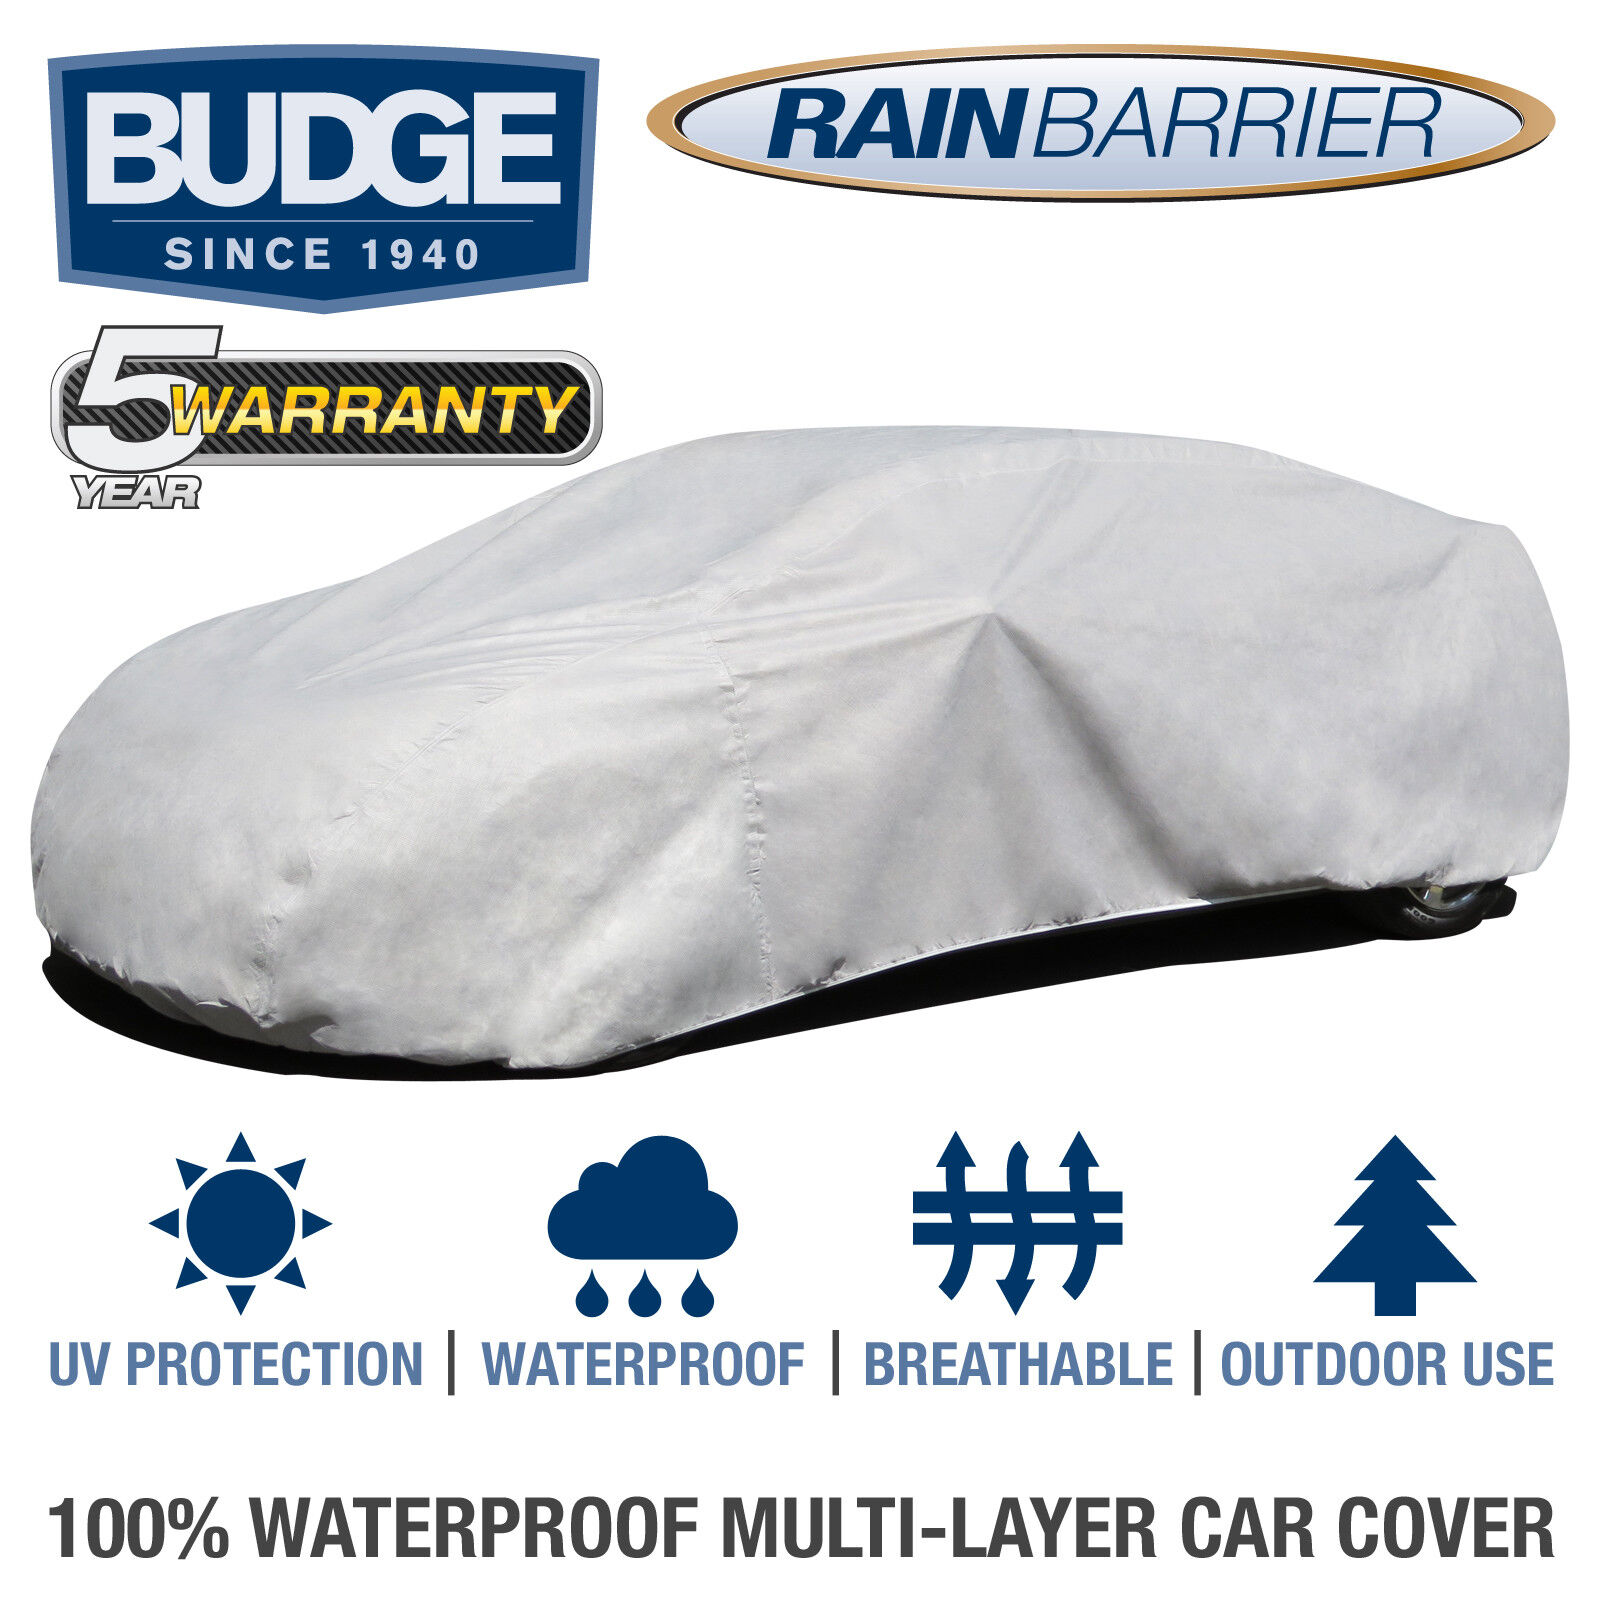 Budge Rain Barrier Car Cover Fits Pontiac Tempest 1968| Waterproof | Breathable